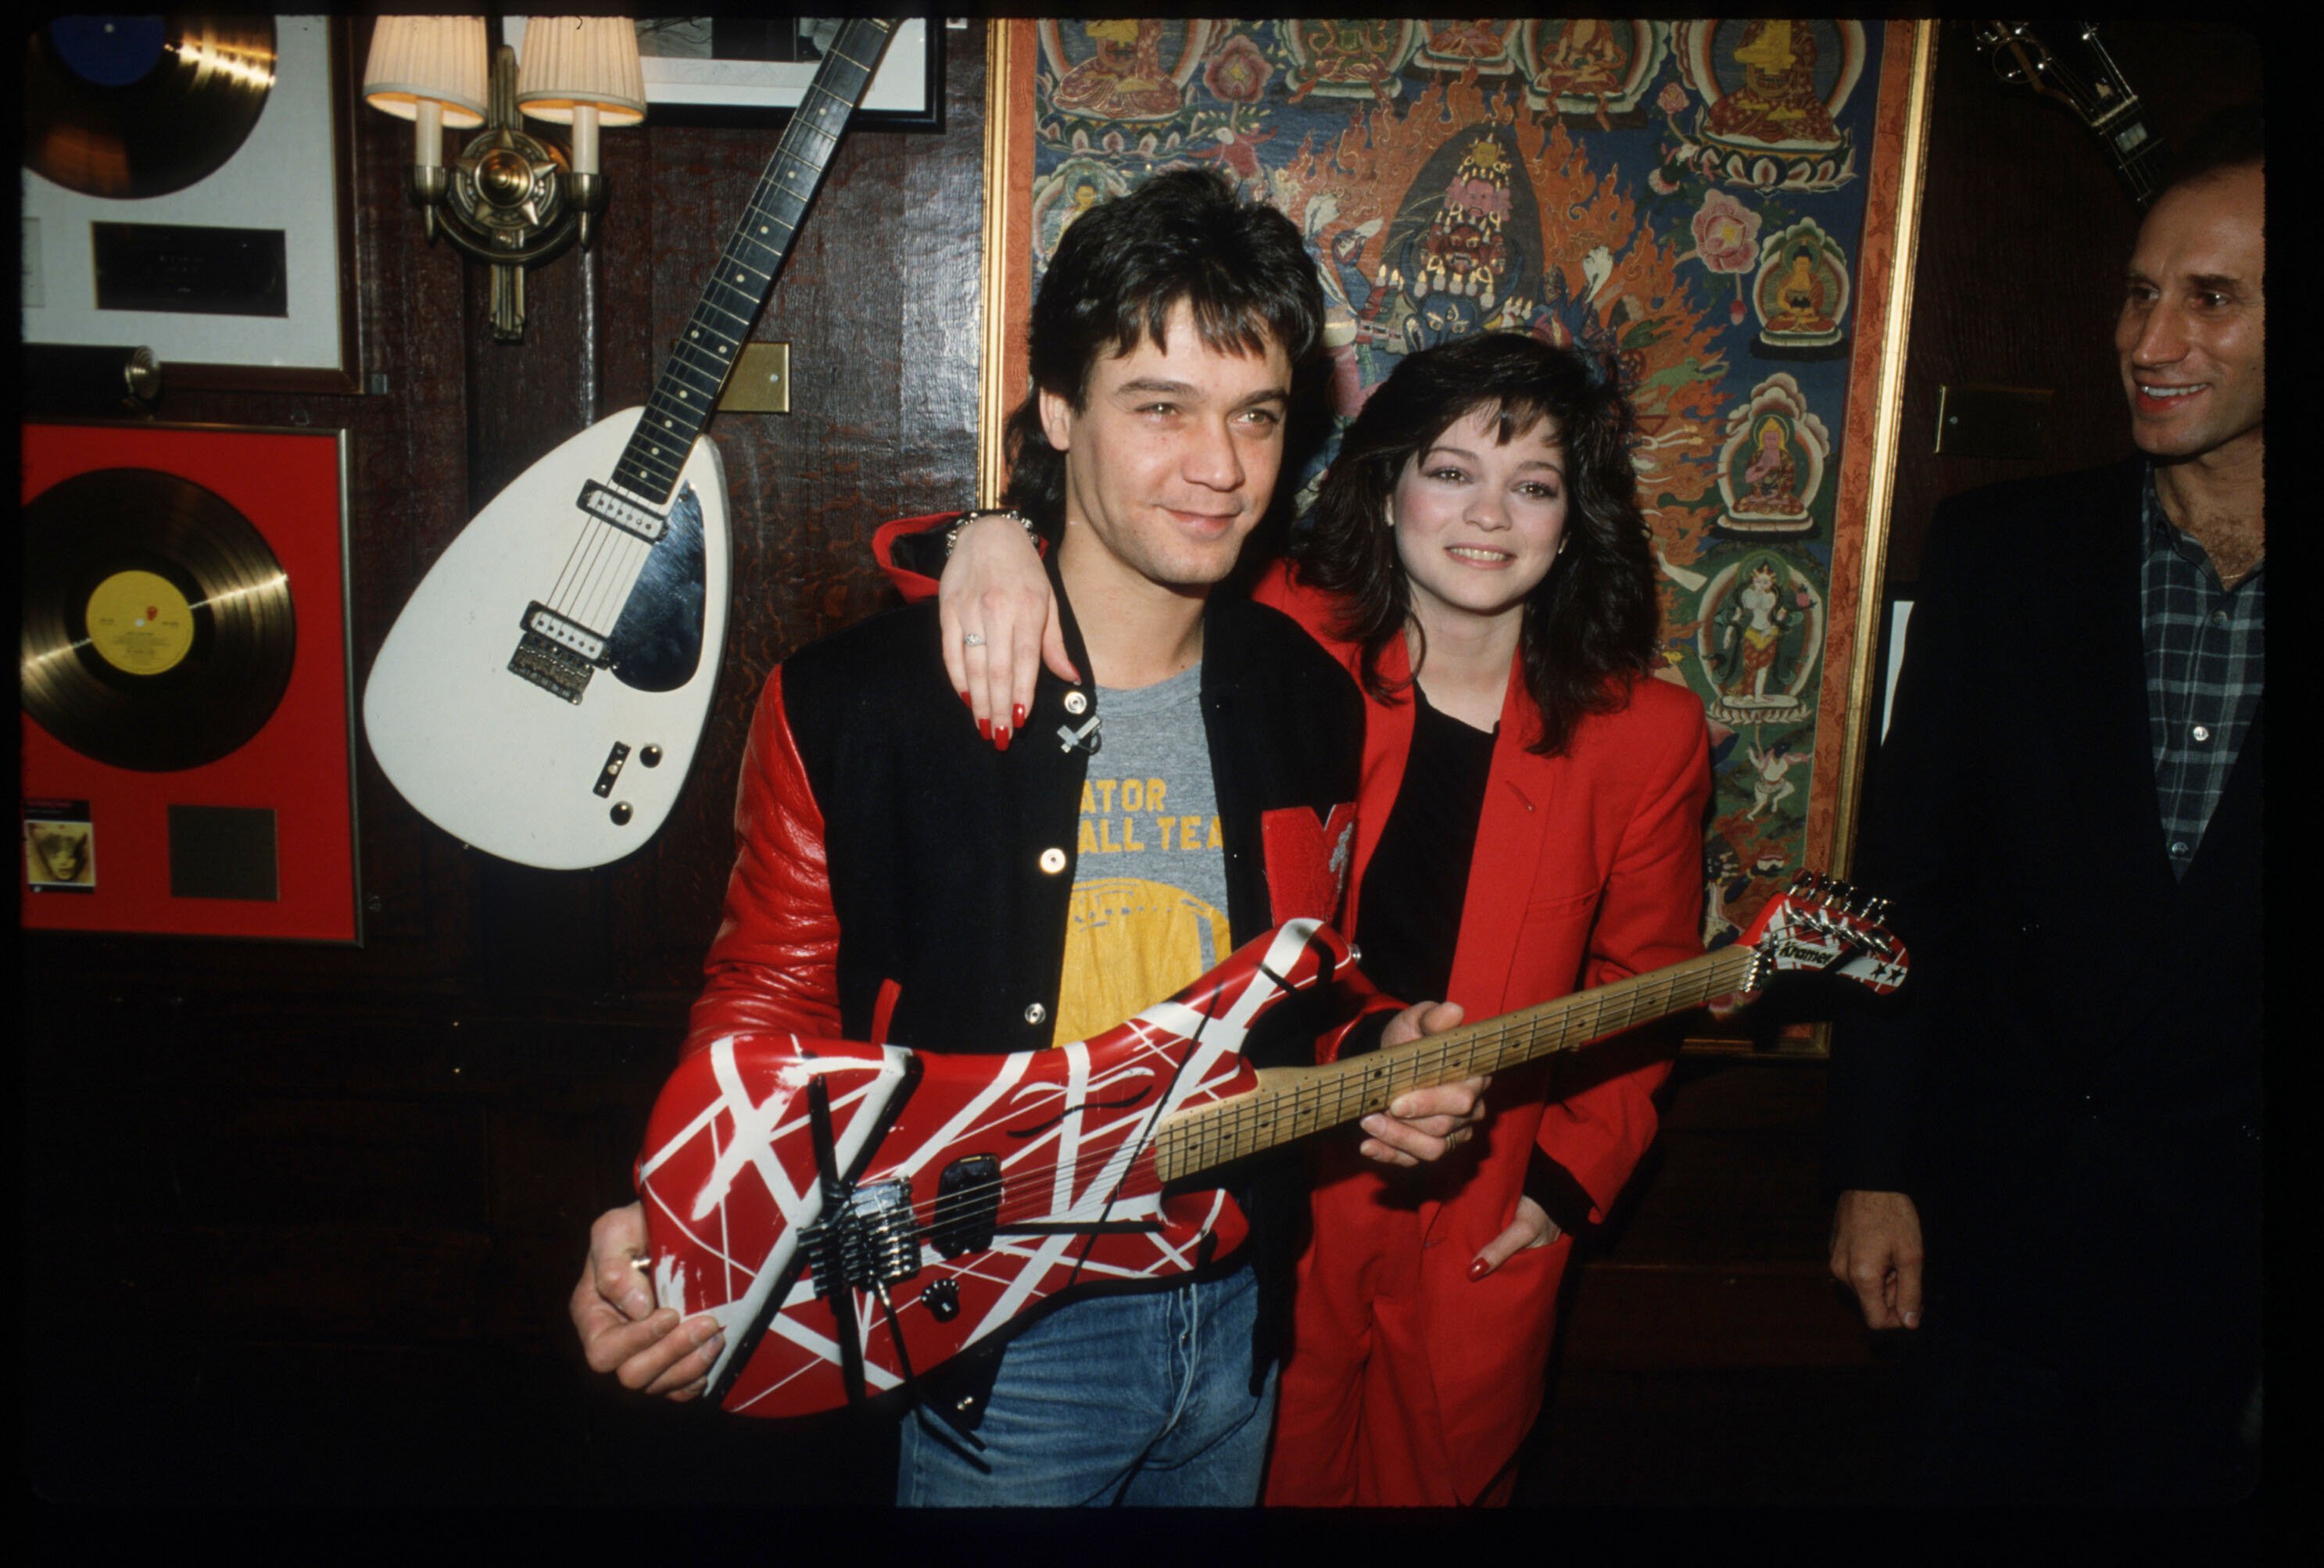 Eddie Van Halen and Valerie Bertinelli at the Hard Rock Cafe on February 18, 1995 in New York City. | Source: Getty Images